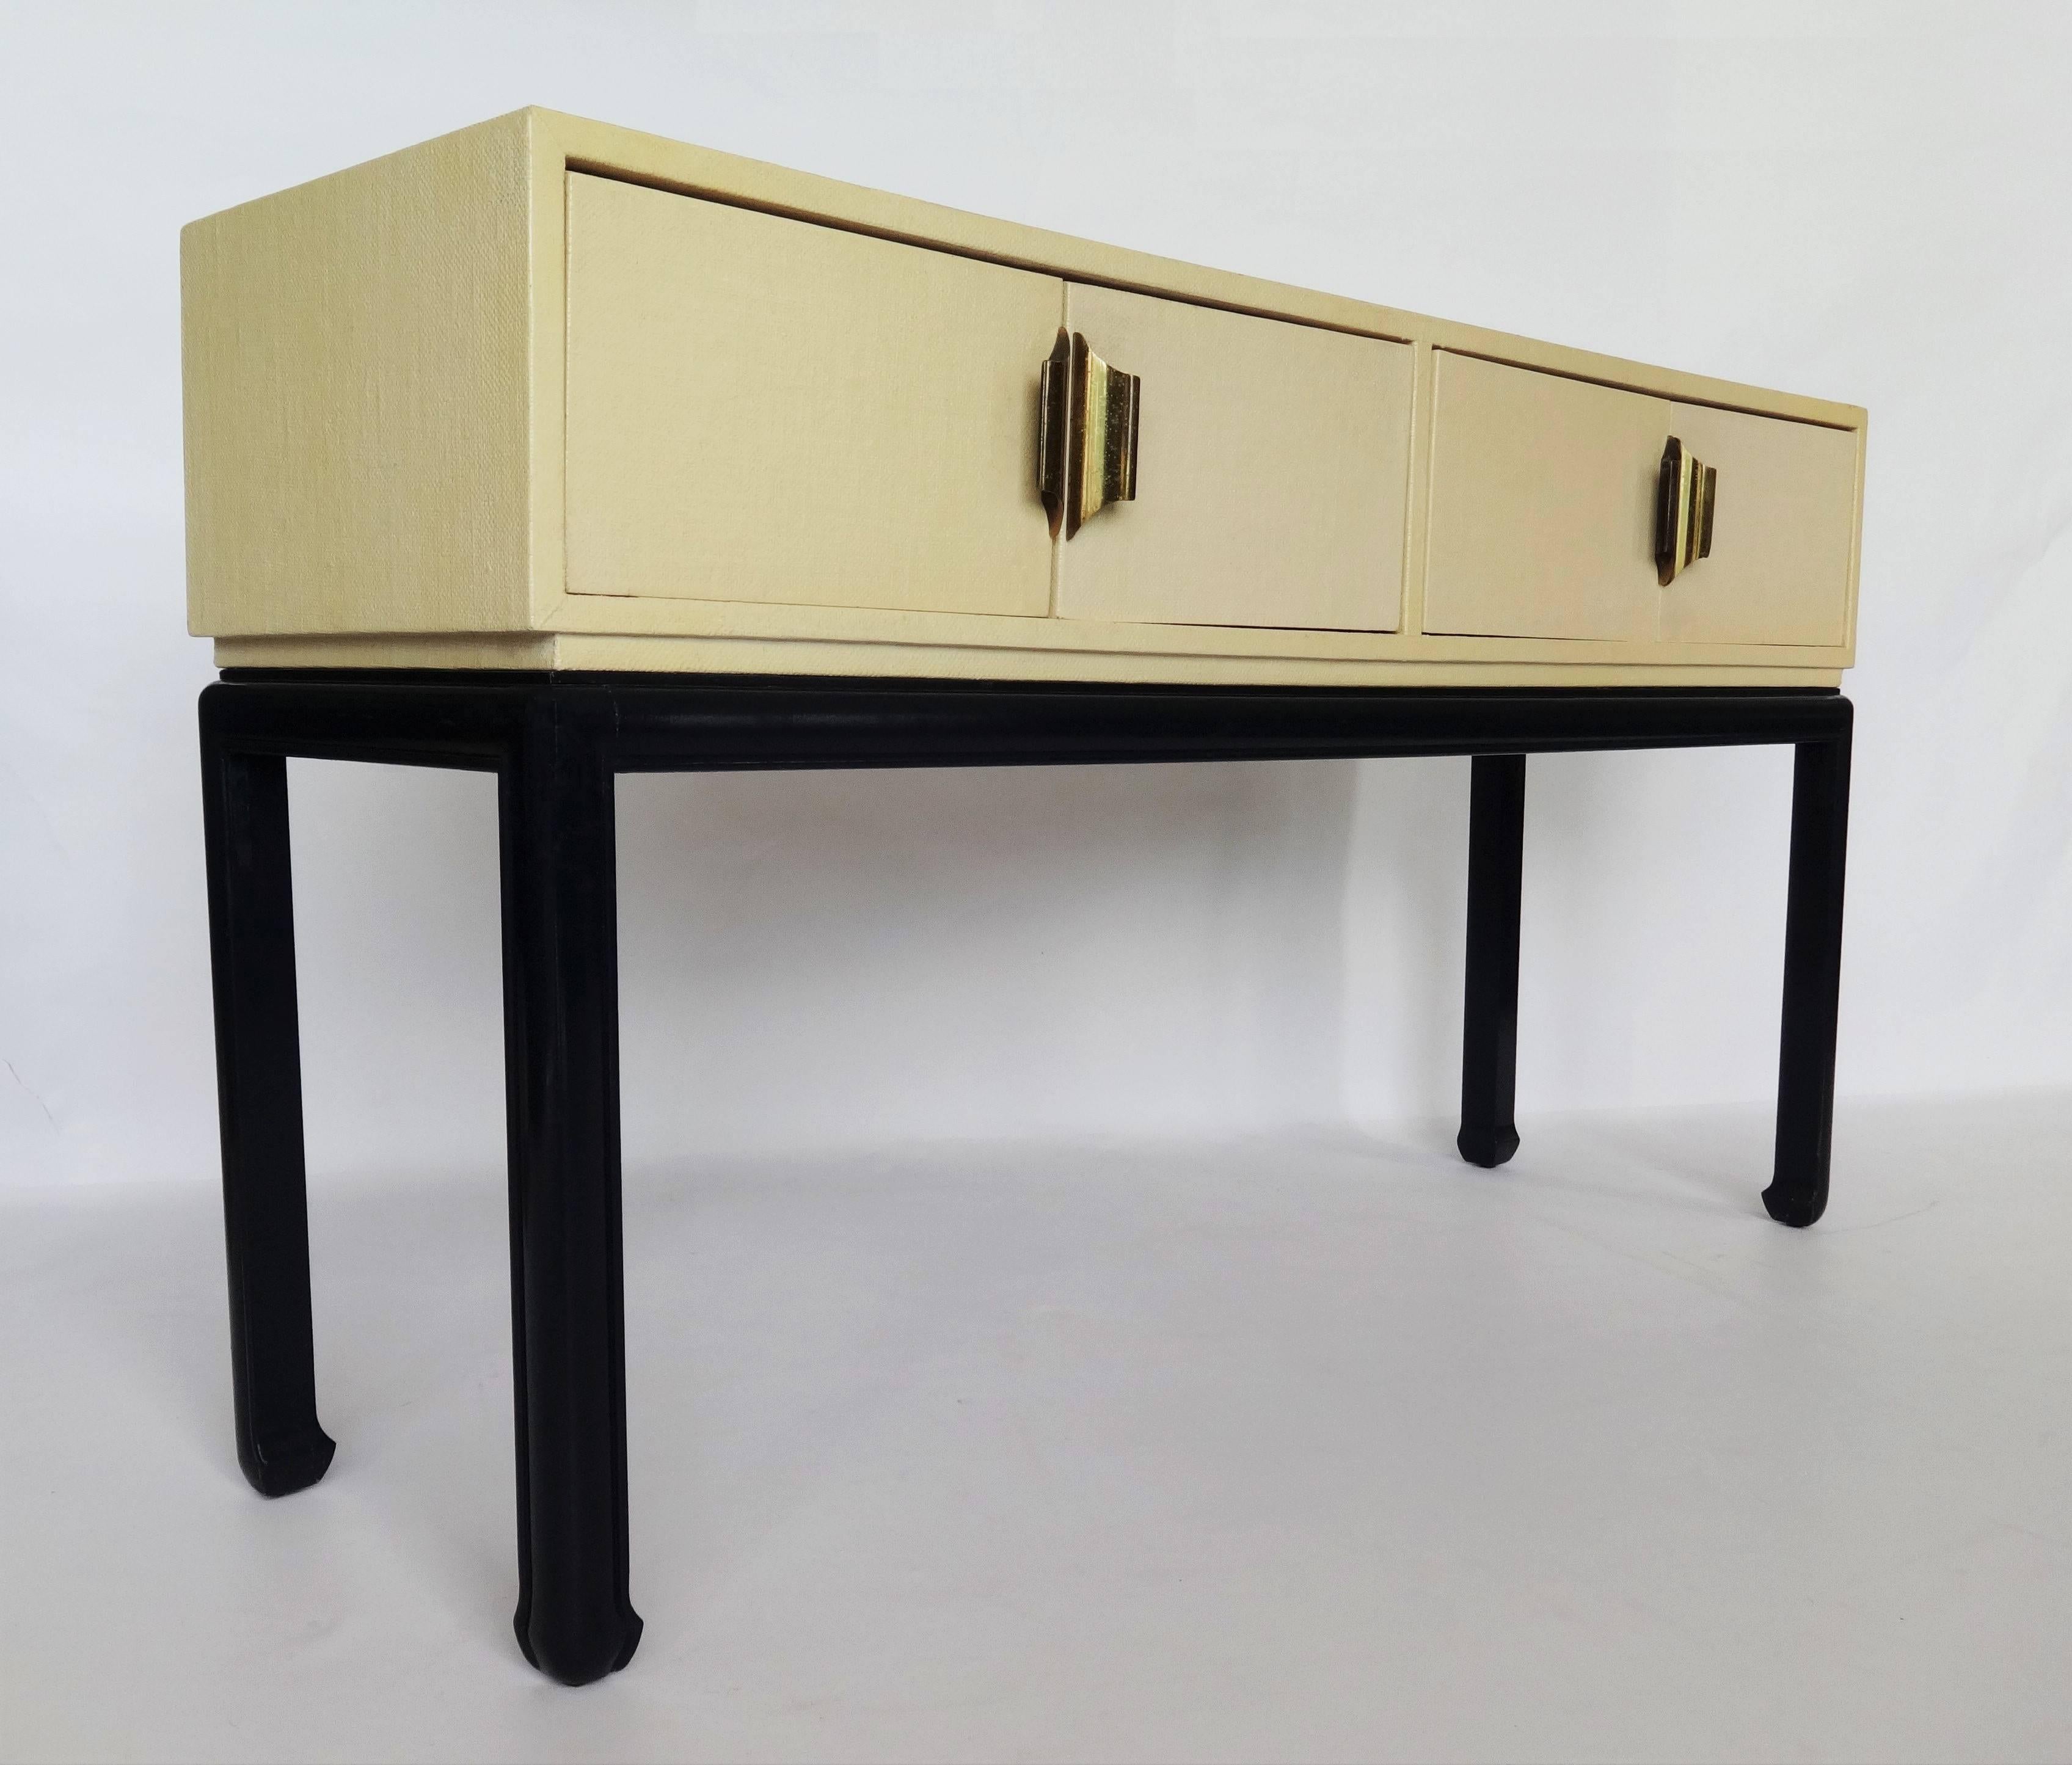 A modern vintage grasscloth wrapped console or buffet with four doors. Asian inspired brass hardware and ebonized base, in the Chinese Chippendale style. Very practical and extremely good looking.